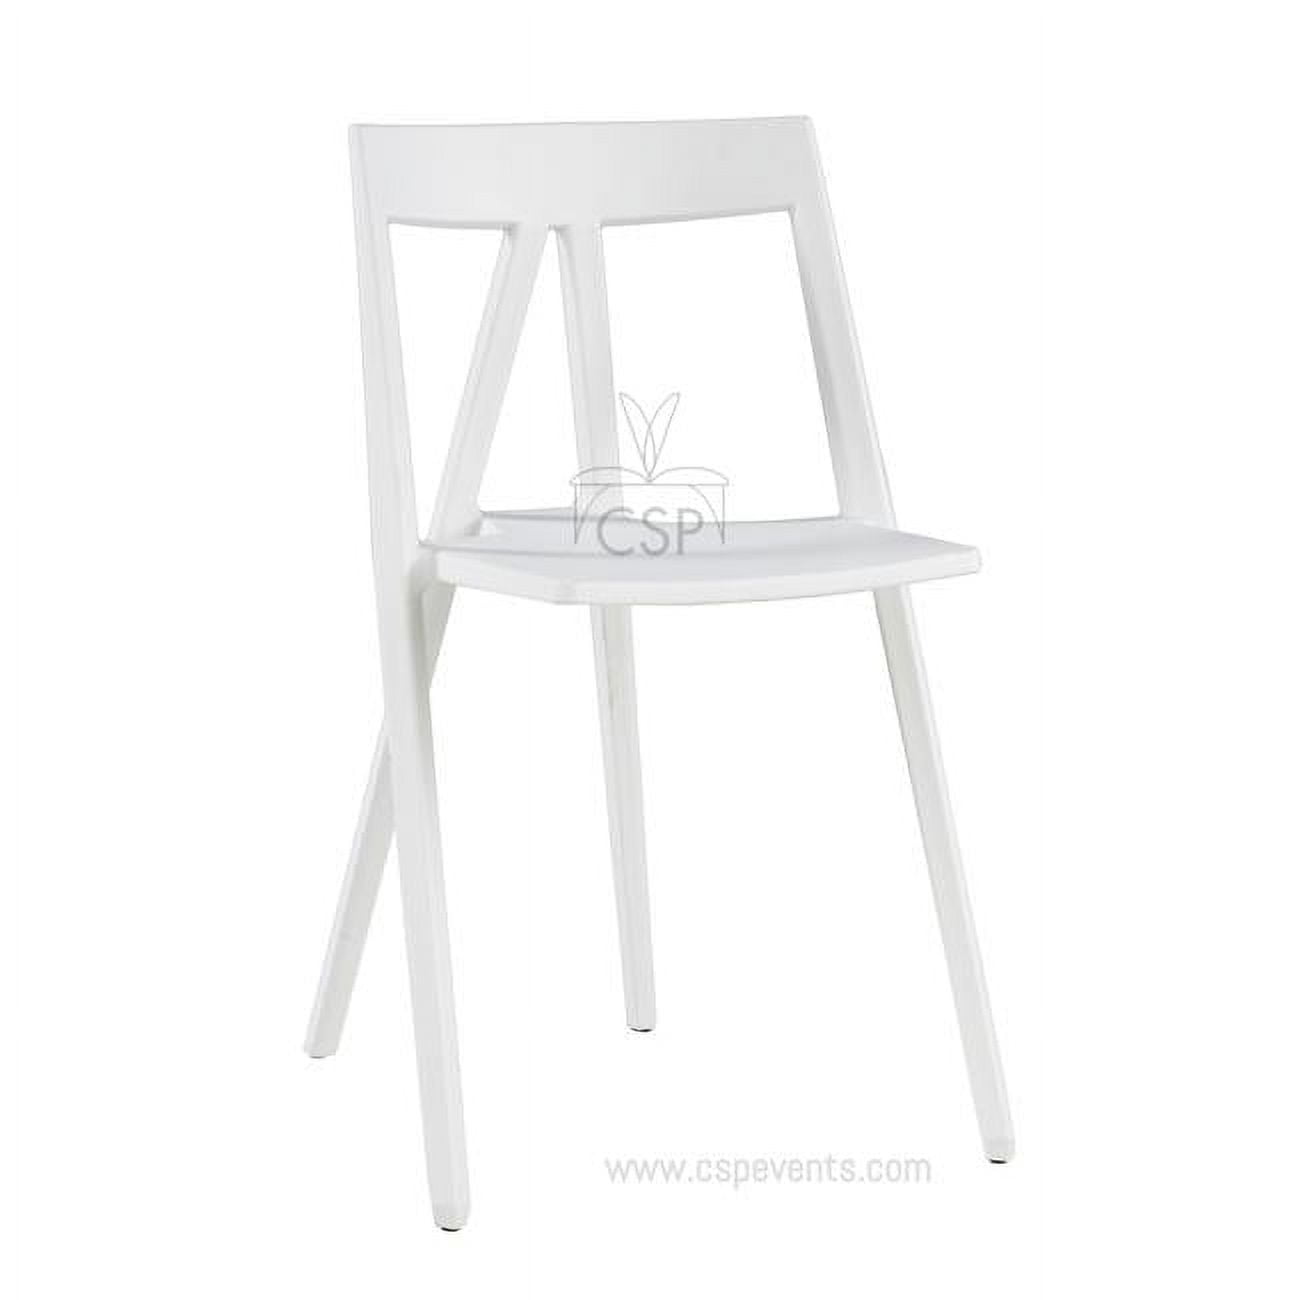 Rpp-milan-wh-4 Milan Resin Polypropylene Stackable Event Chair, White - 29.5 In. - Set Of 4